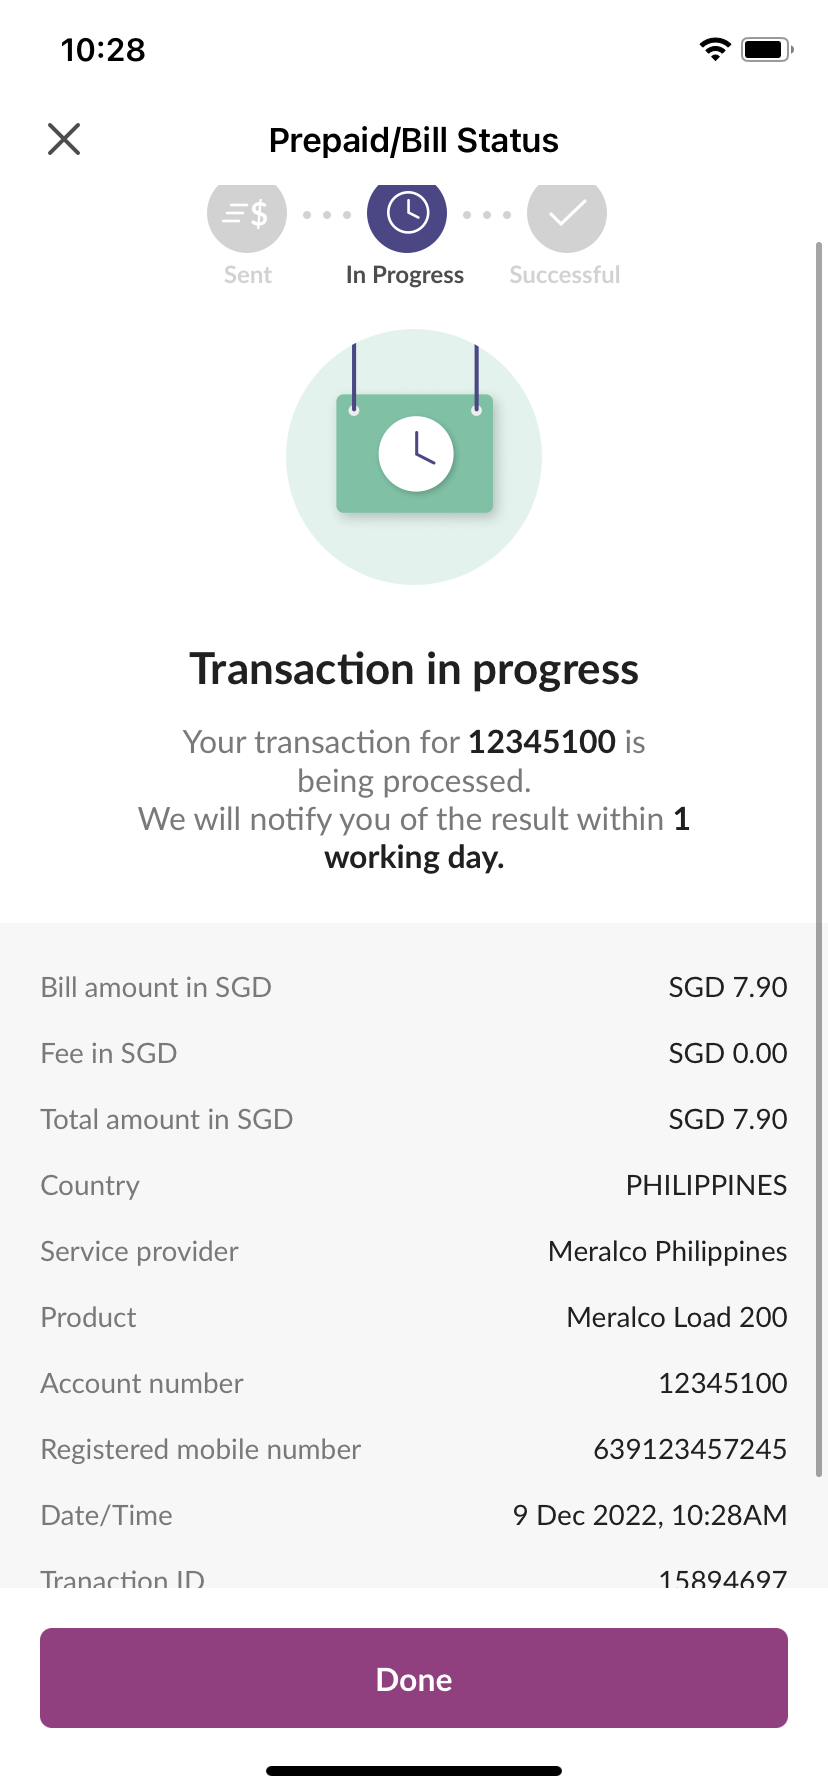 Overseas Bill Payment is being processed